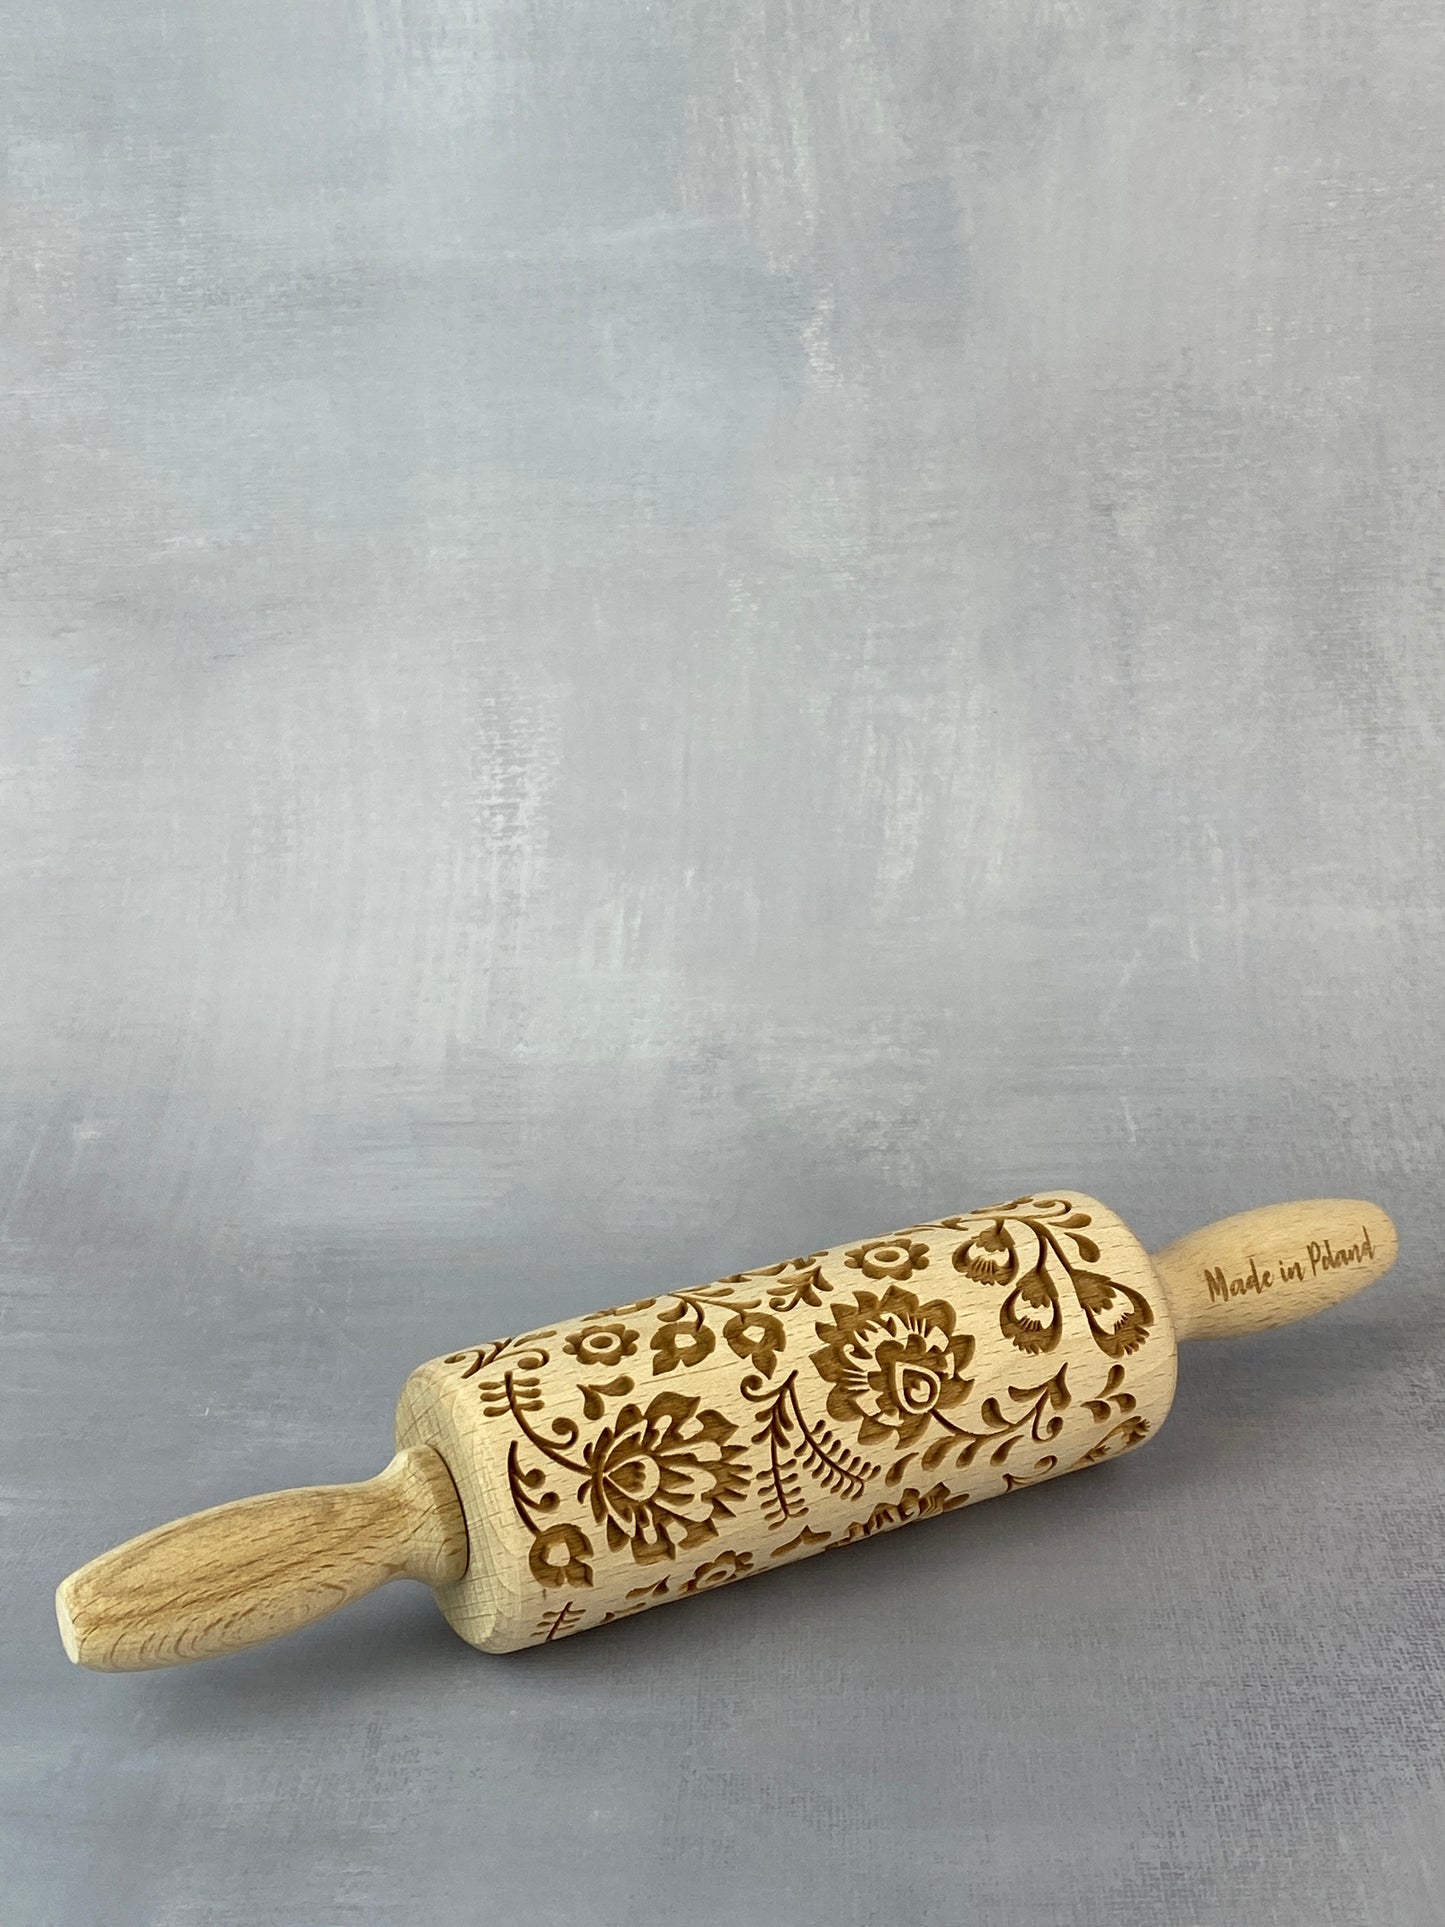 Wooden Rolling Pin - Bold Folk Floral